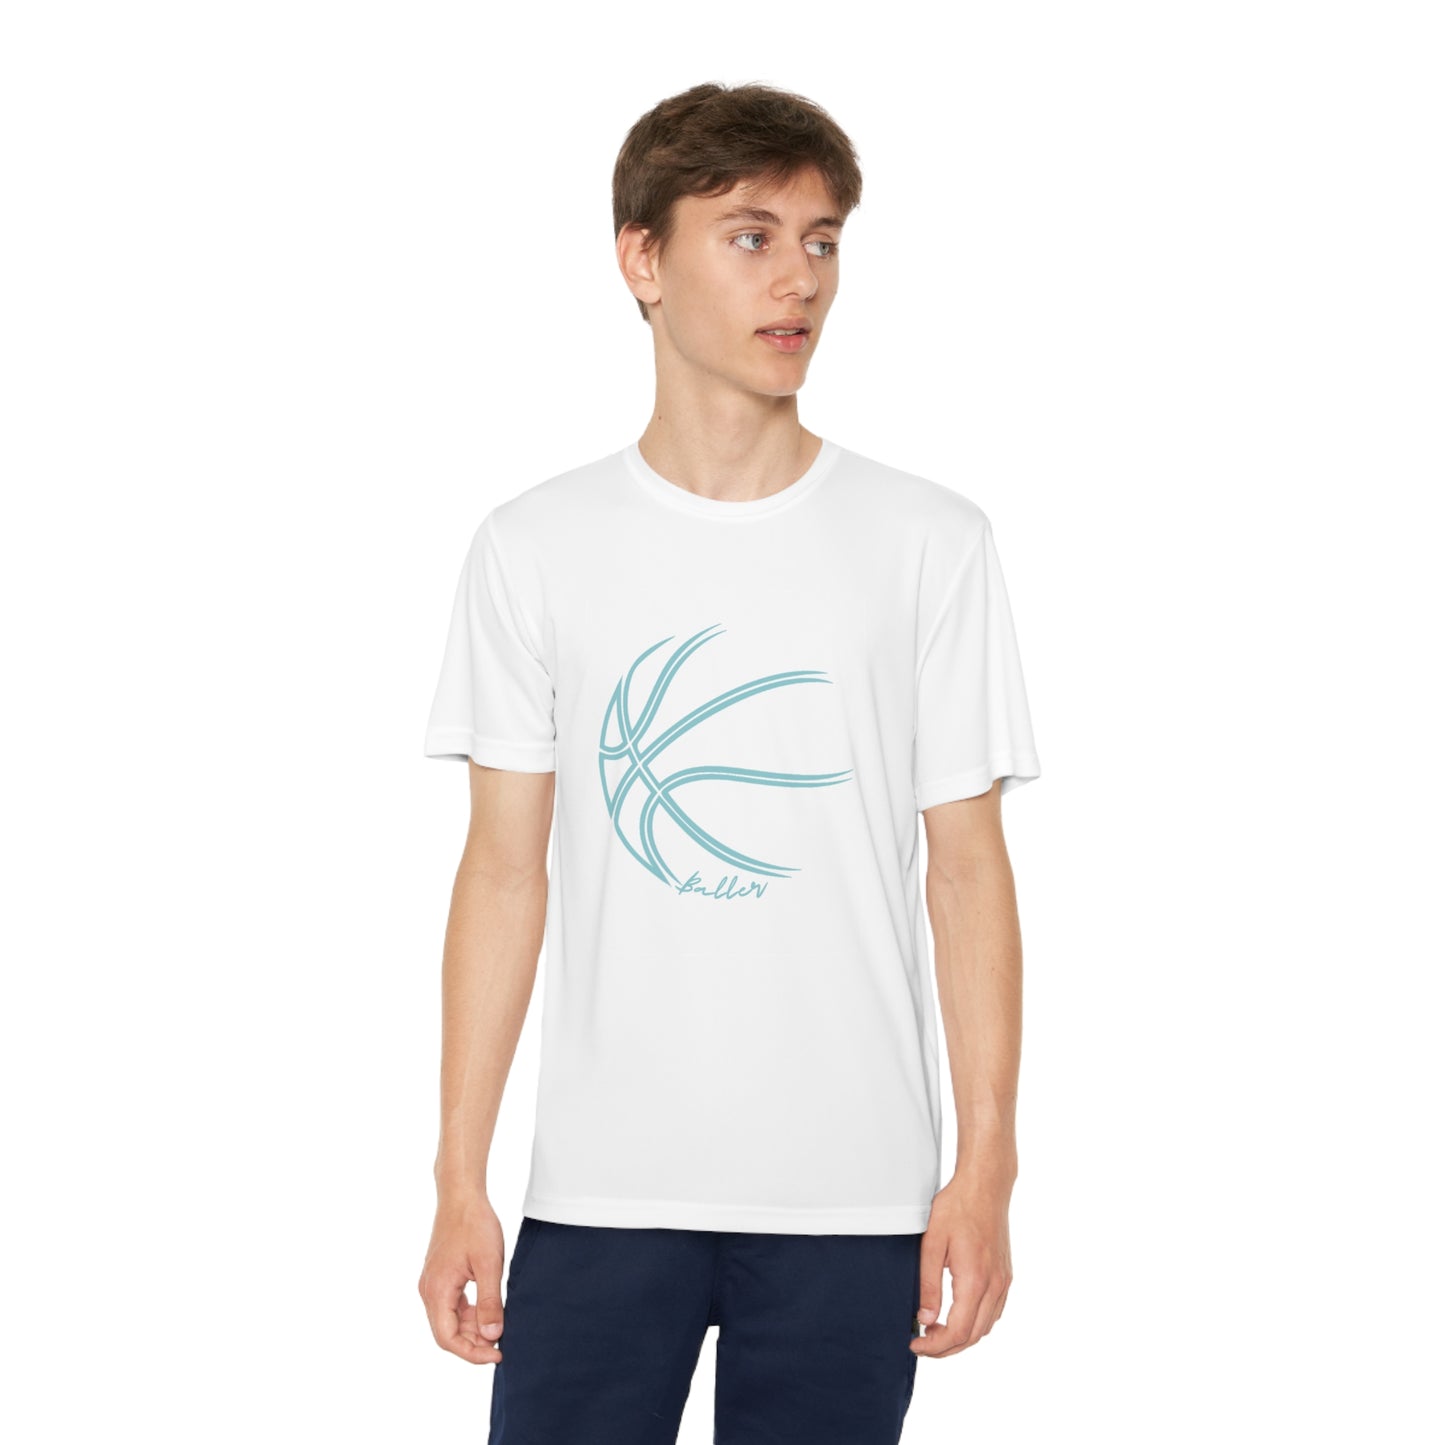 Baller I inspired by Jase & Pierce - Youth Competitor Tee